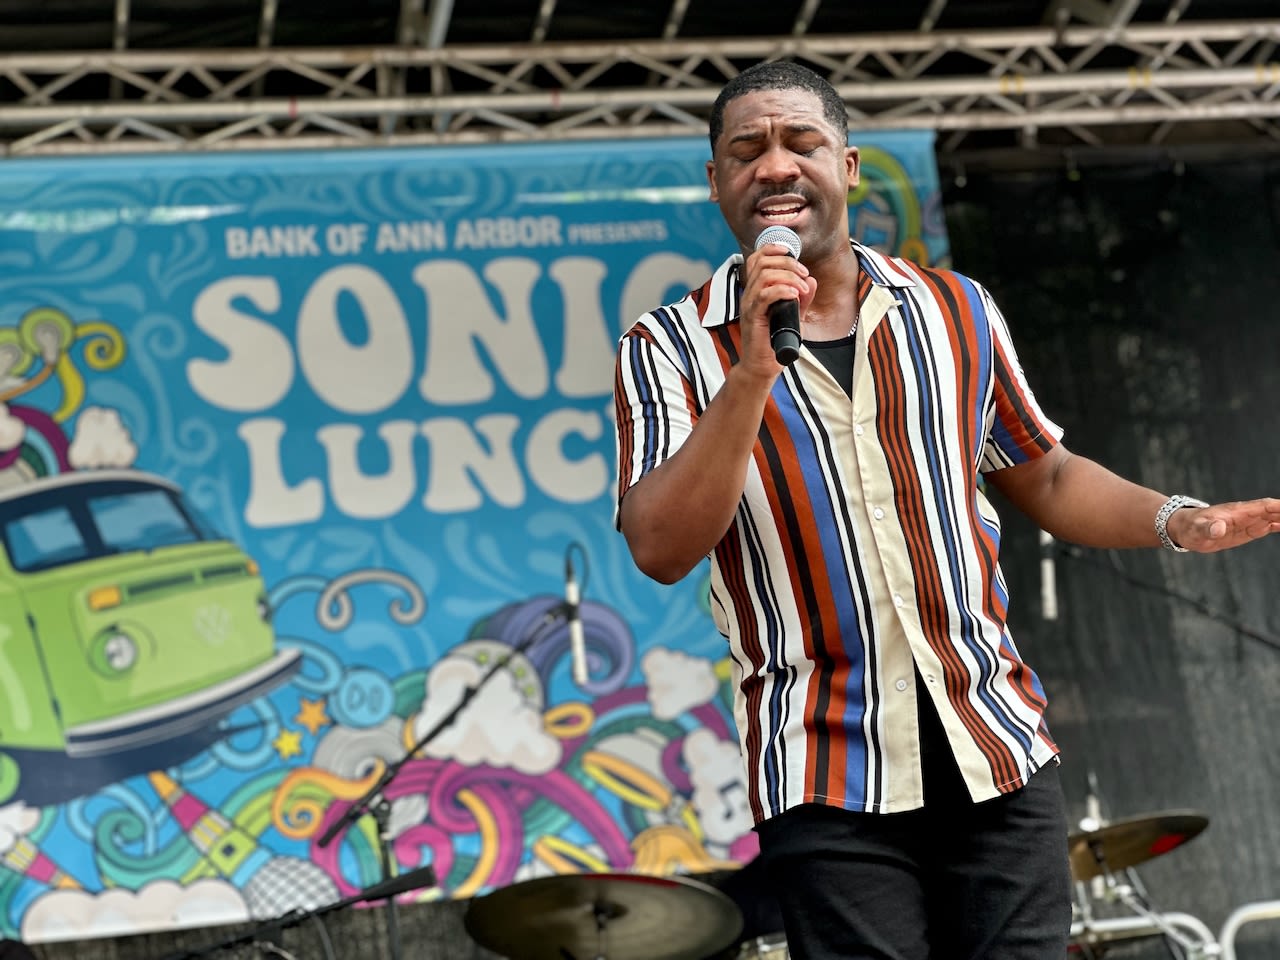 Ann Arbor streets to close for Sonic Lunch, Top of the Park, YMCA Block Party